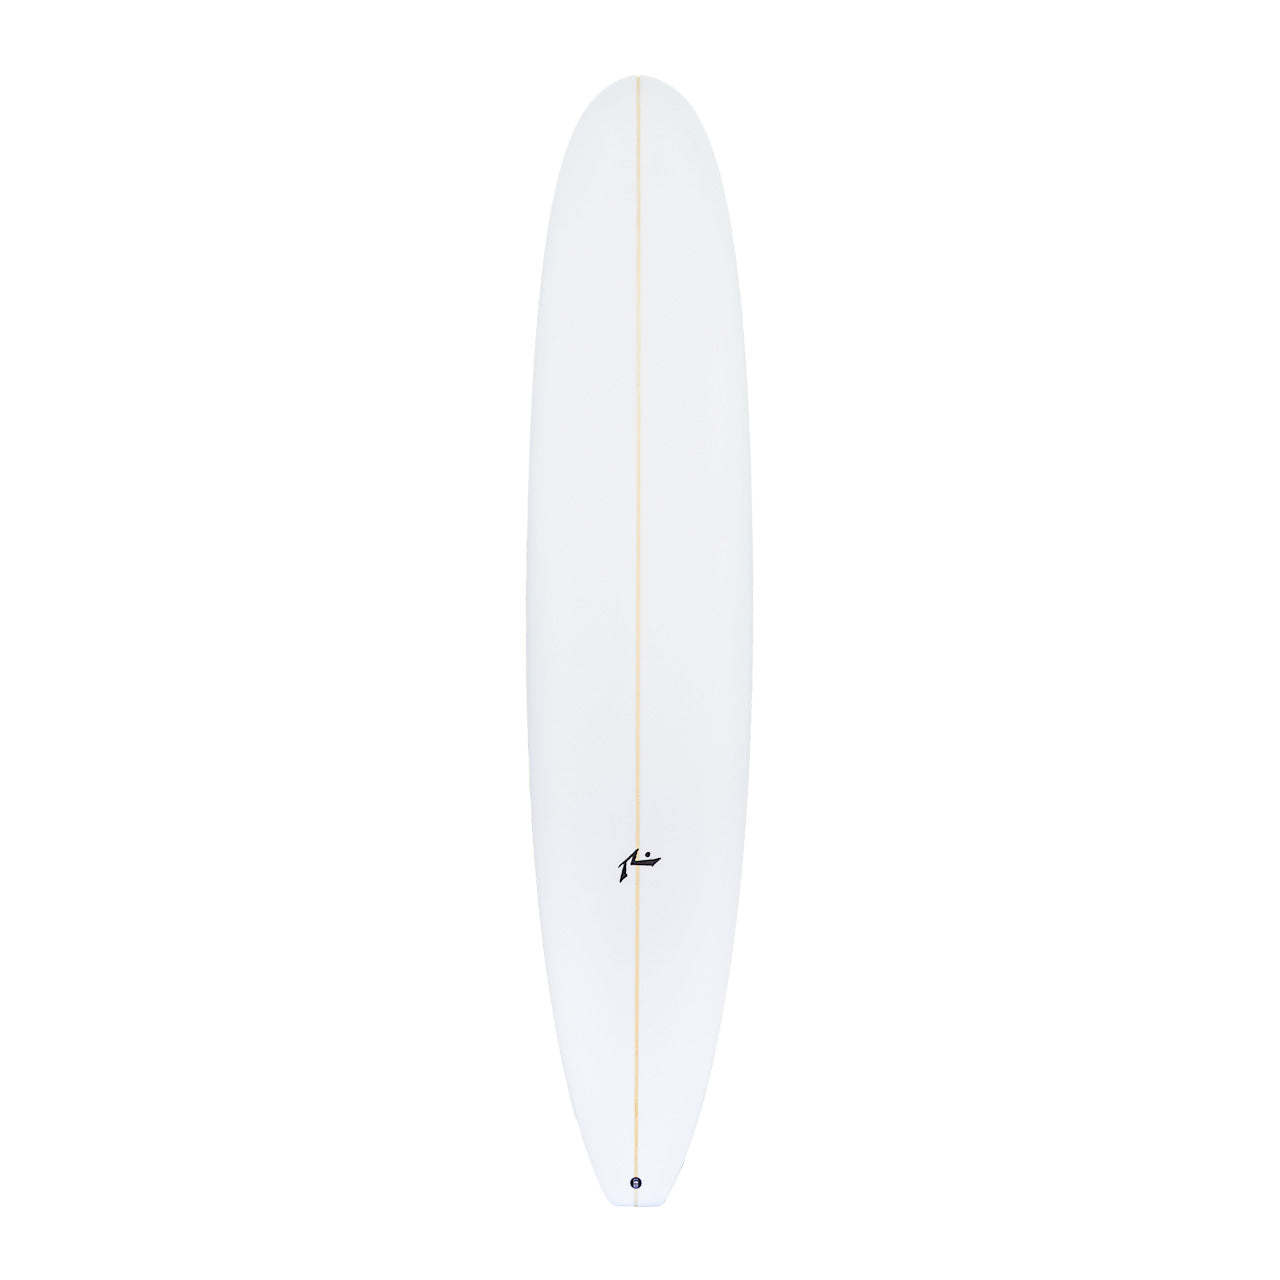 Utility - All Around Performance Longboard - Rusty Surfboards - Green Tint